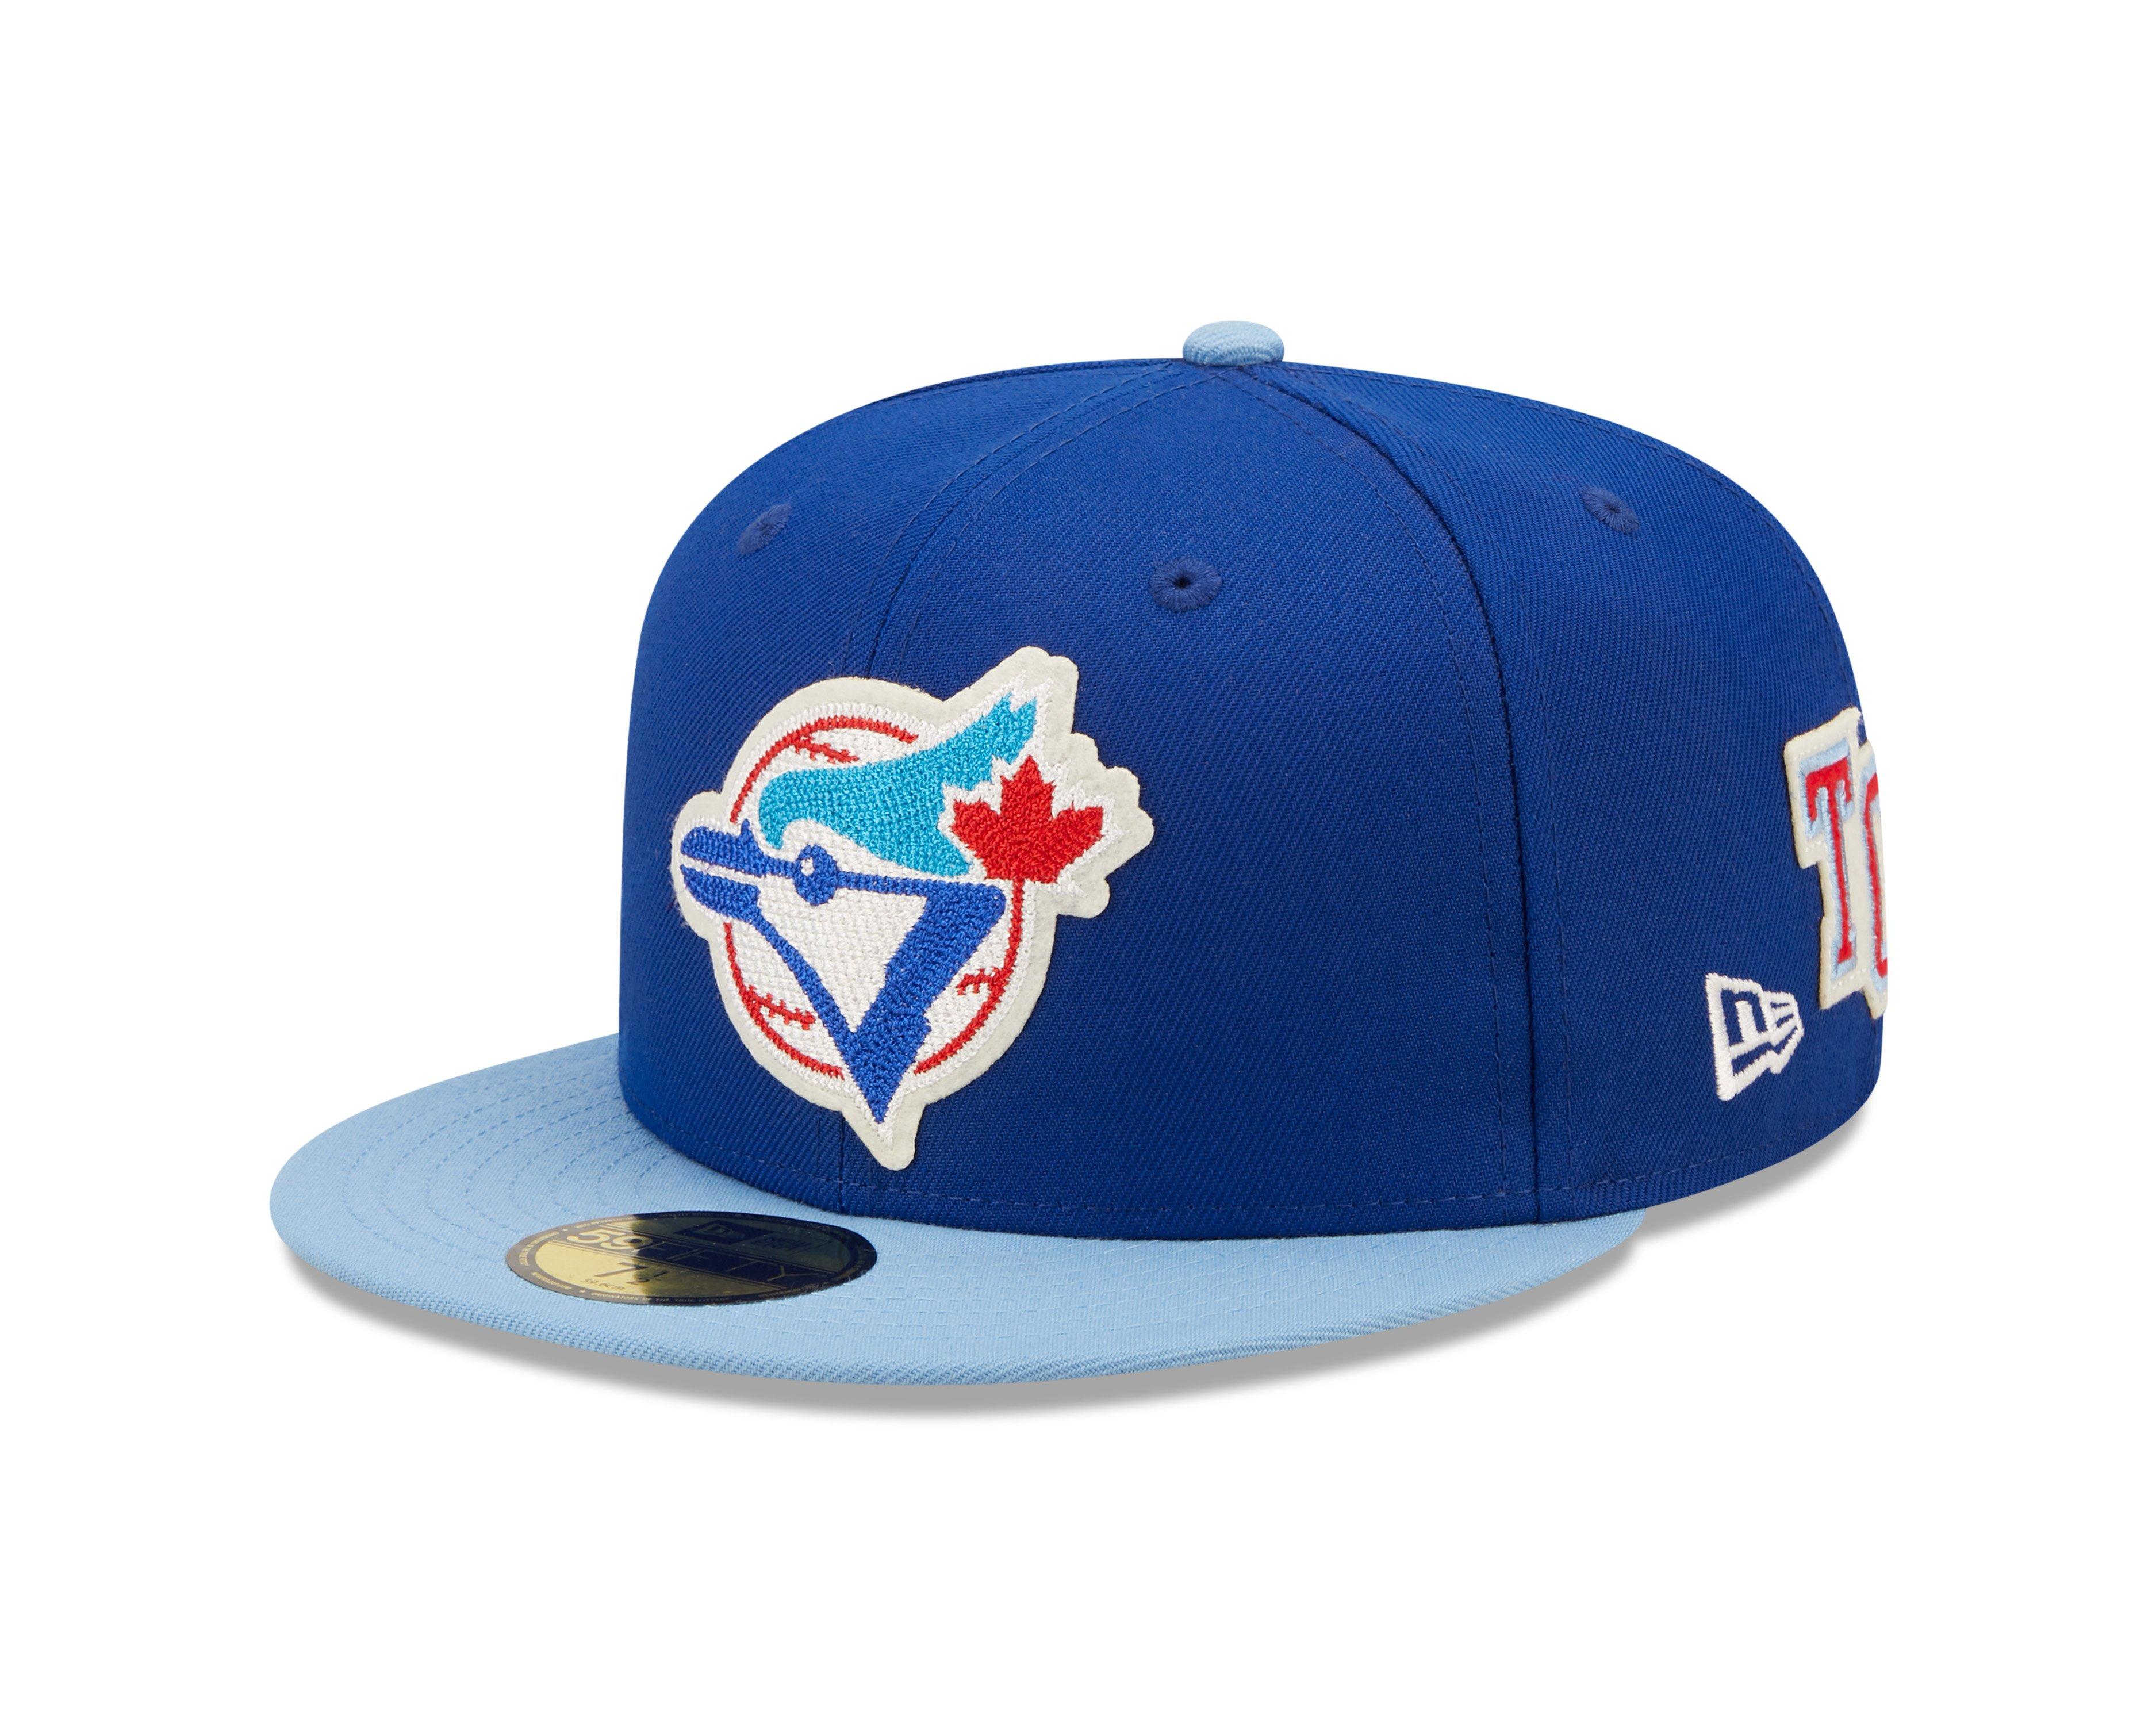 10 Toronto snapback hats you can buy right now